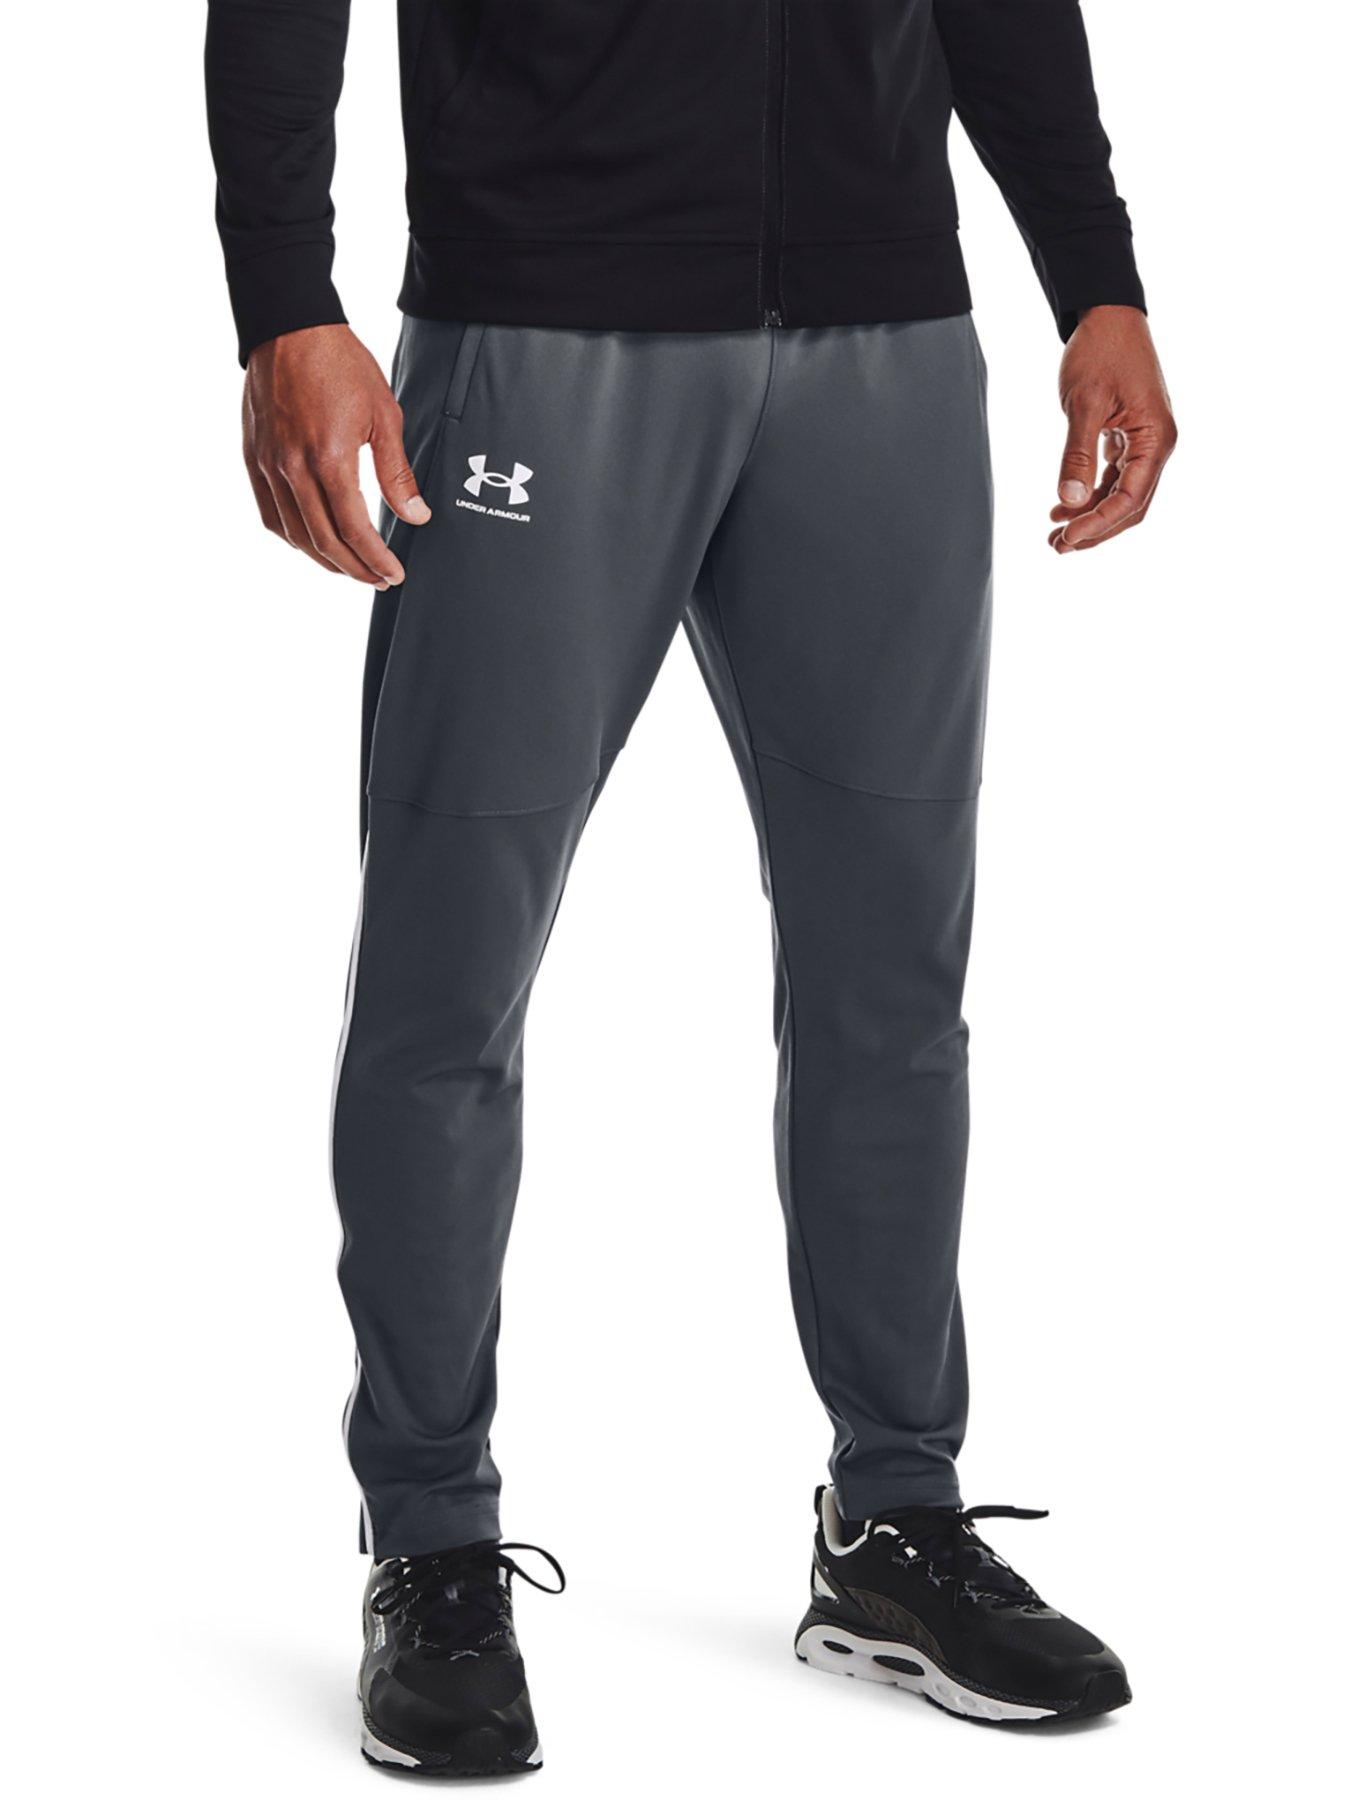 Tracksuit Bottoms | Under armour | Tracksuits | Mens clothing Sports & leisure | www.very.co.uk